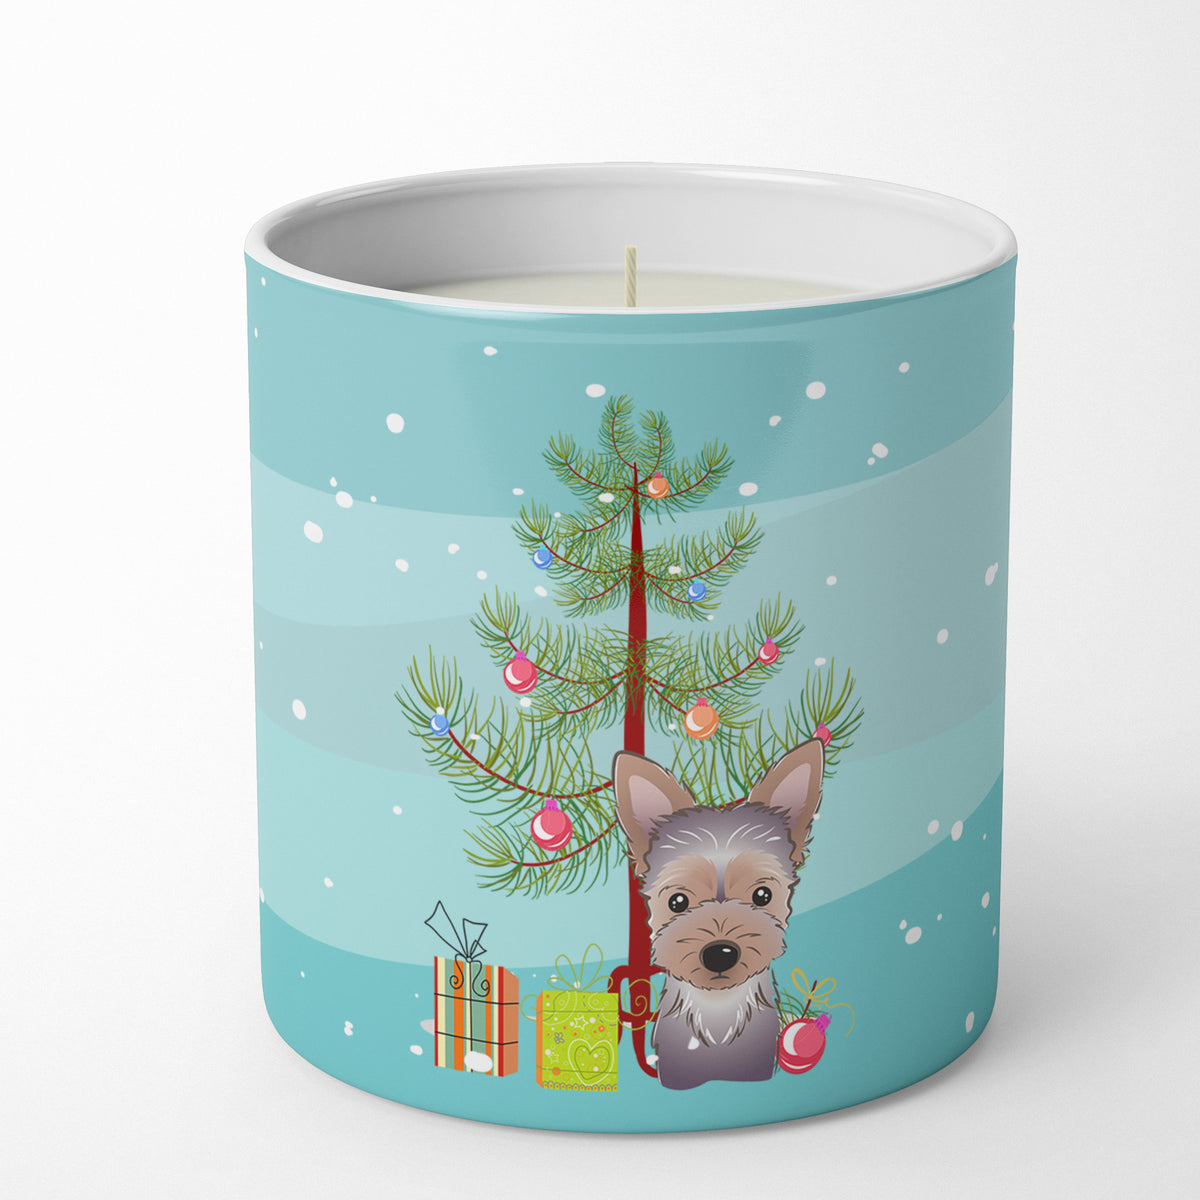 Buy this Christmas Tree and Yorkie Puppy 10 oz Decorative Soy Candle